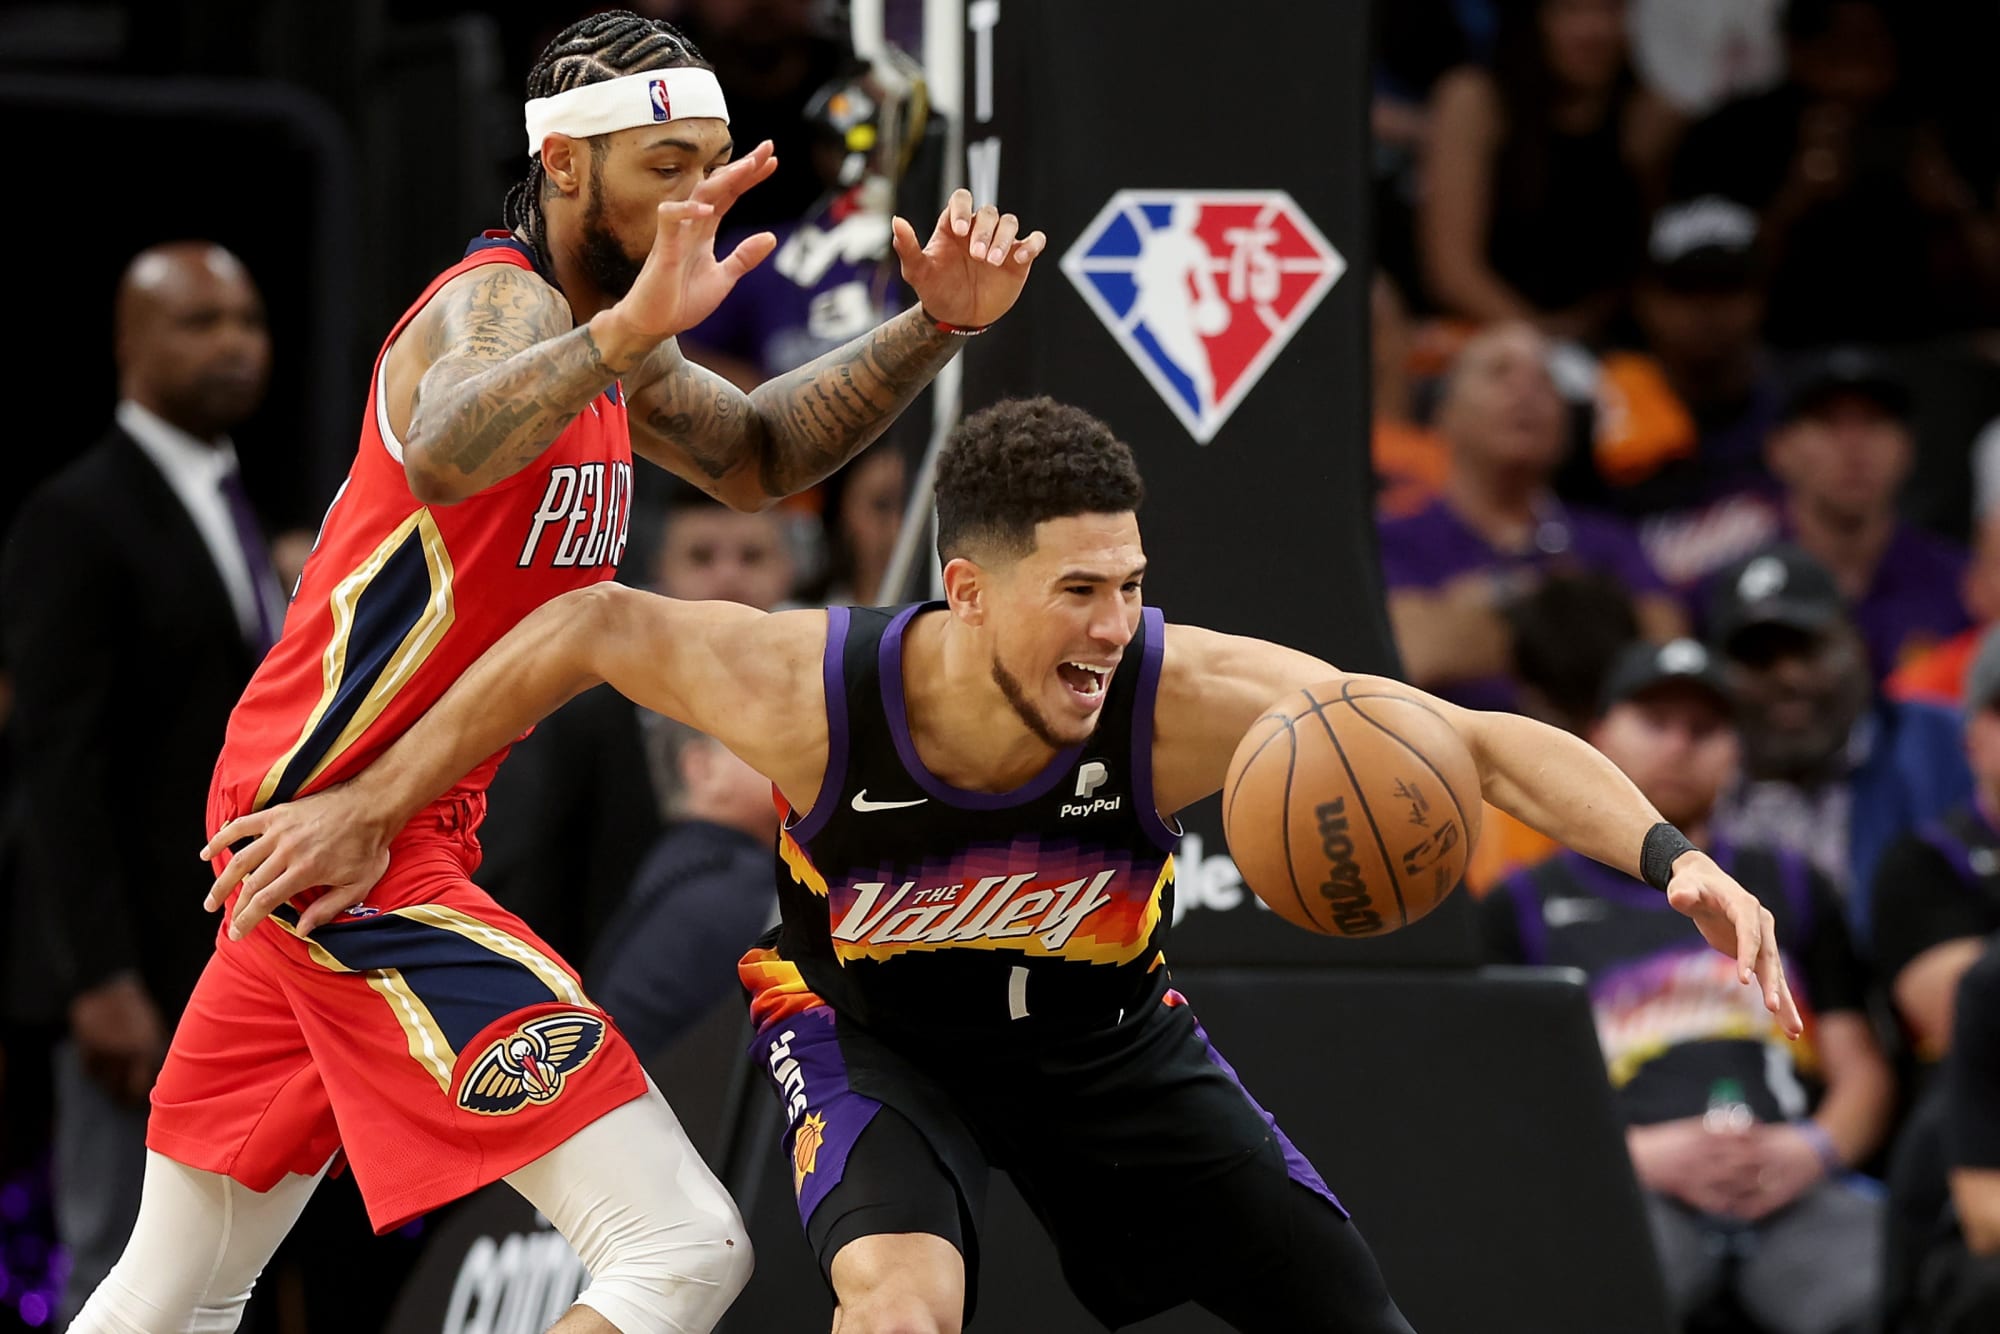 Pelicans vs. Suns: 2 important stats to look at in this series